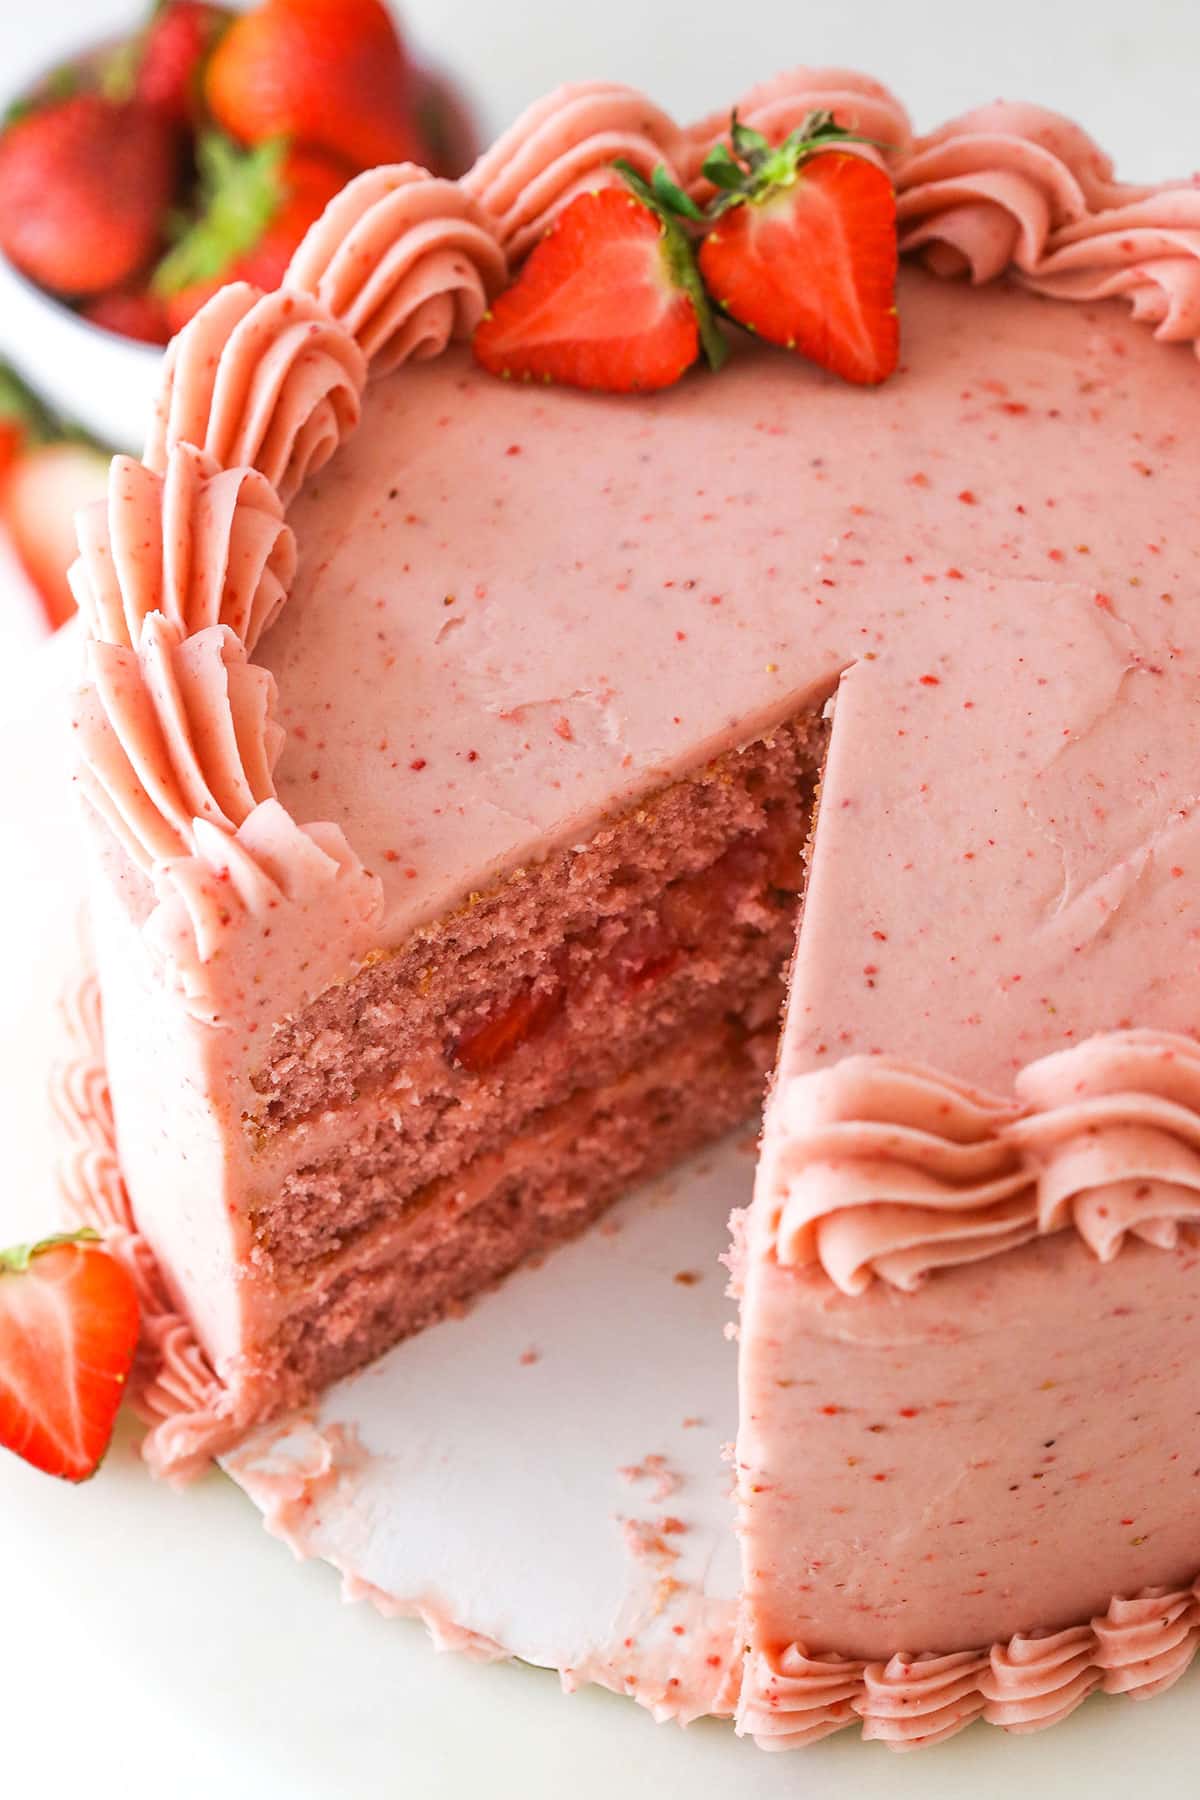 Fresh Strawberry Cake Recipe- All-Natural with 2 lbs Strawberries!